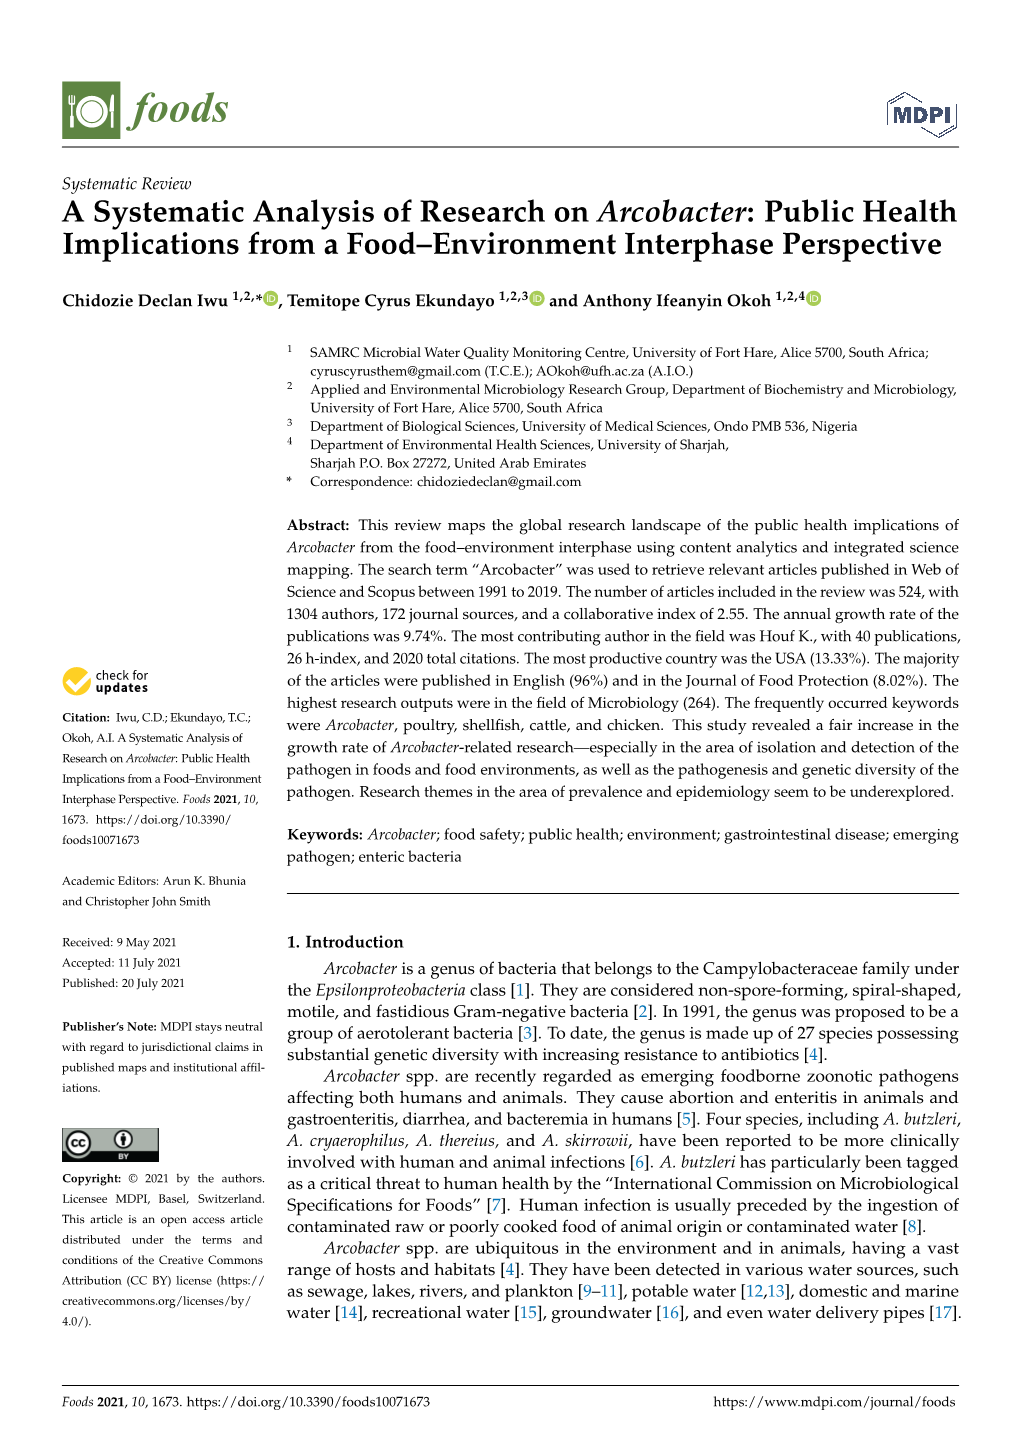 A Systematic Analysis of Research on Arcobacter: Public Health Implications from a Food–Environment Interphase Perspective